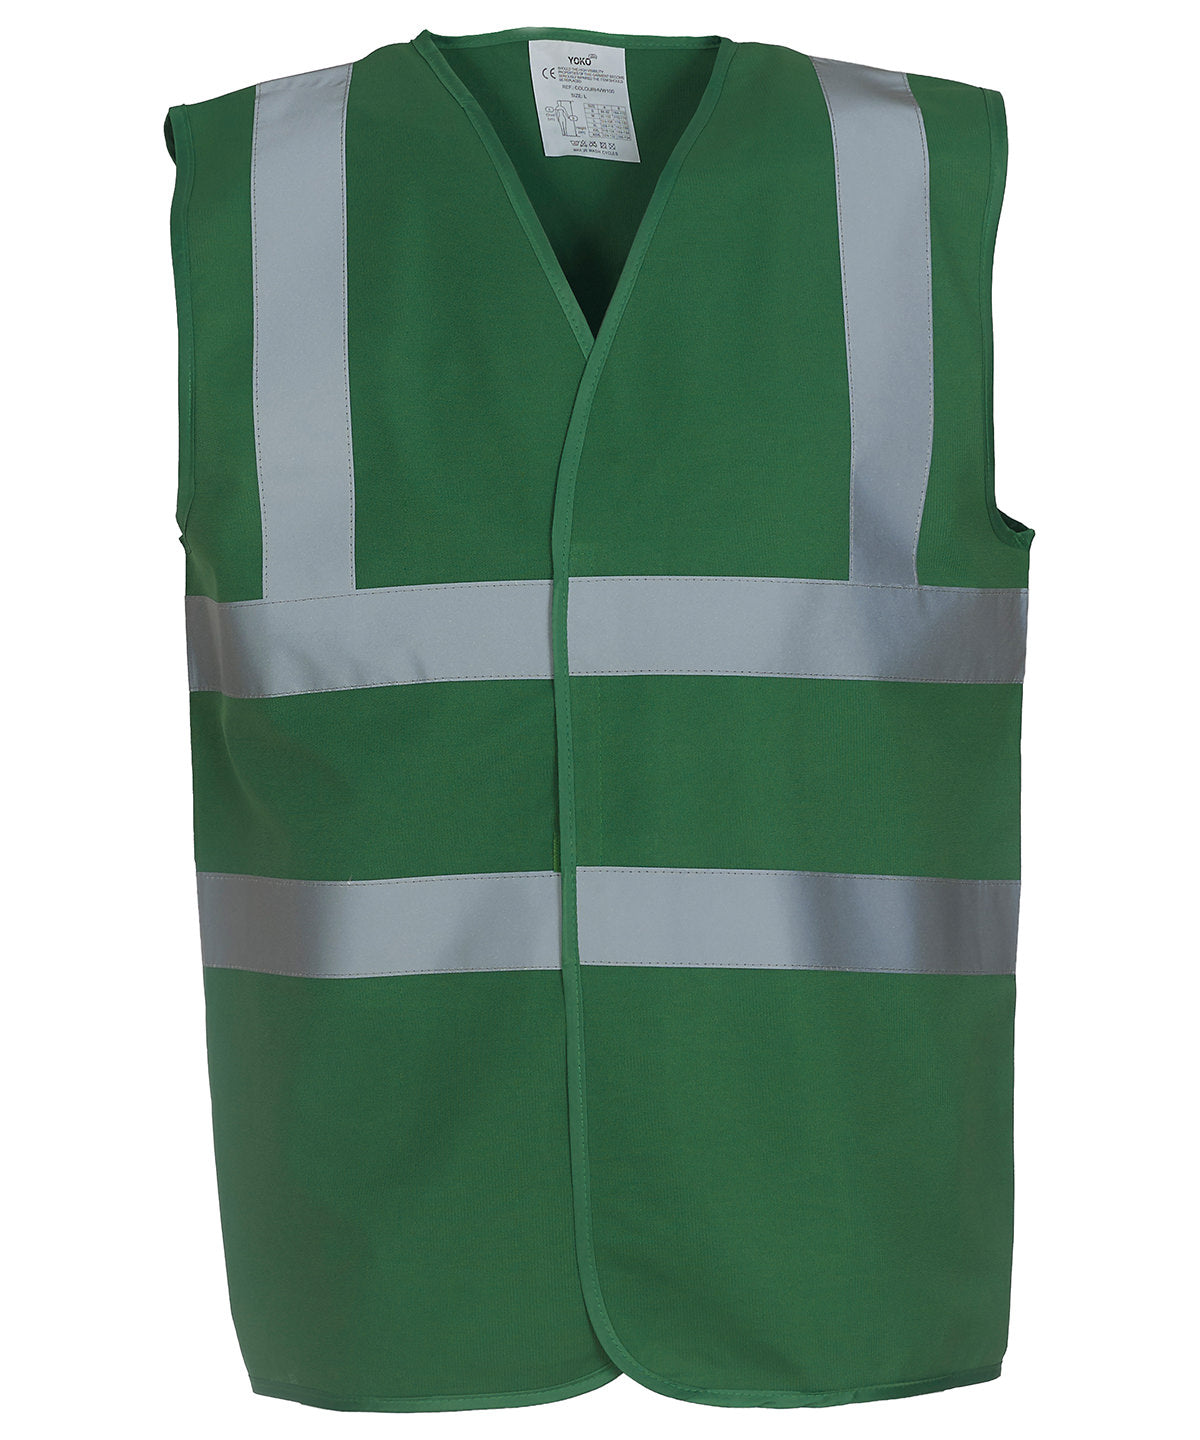 Yoko HVW100 Unisex Two Tone Class 1 Waistcoat/Work Safety Protective Gear Other color - COOZO